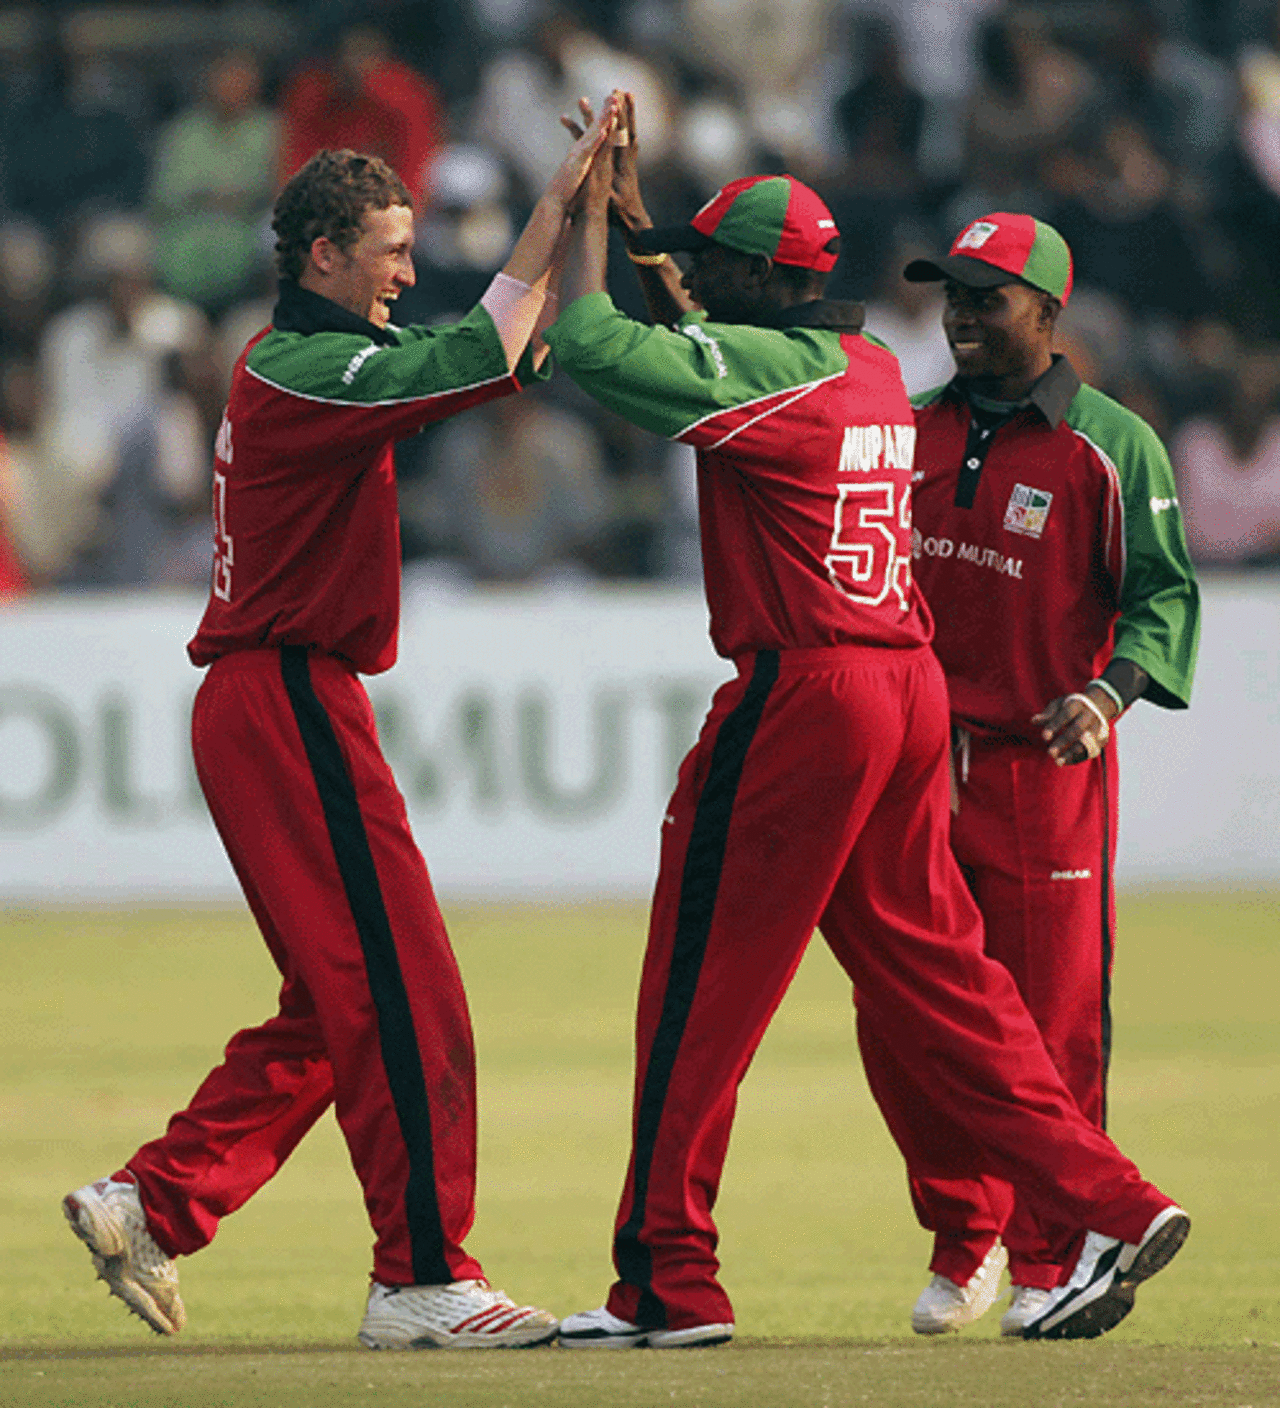 Sean Williams celebrates with team-mates after taking Herschelle Gibbs's wicket, Zimbabwe v South Africa, 2nd ODI, Harare, August 25, 2007